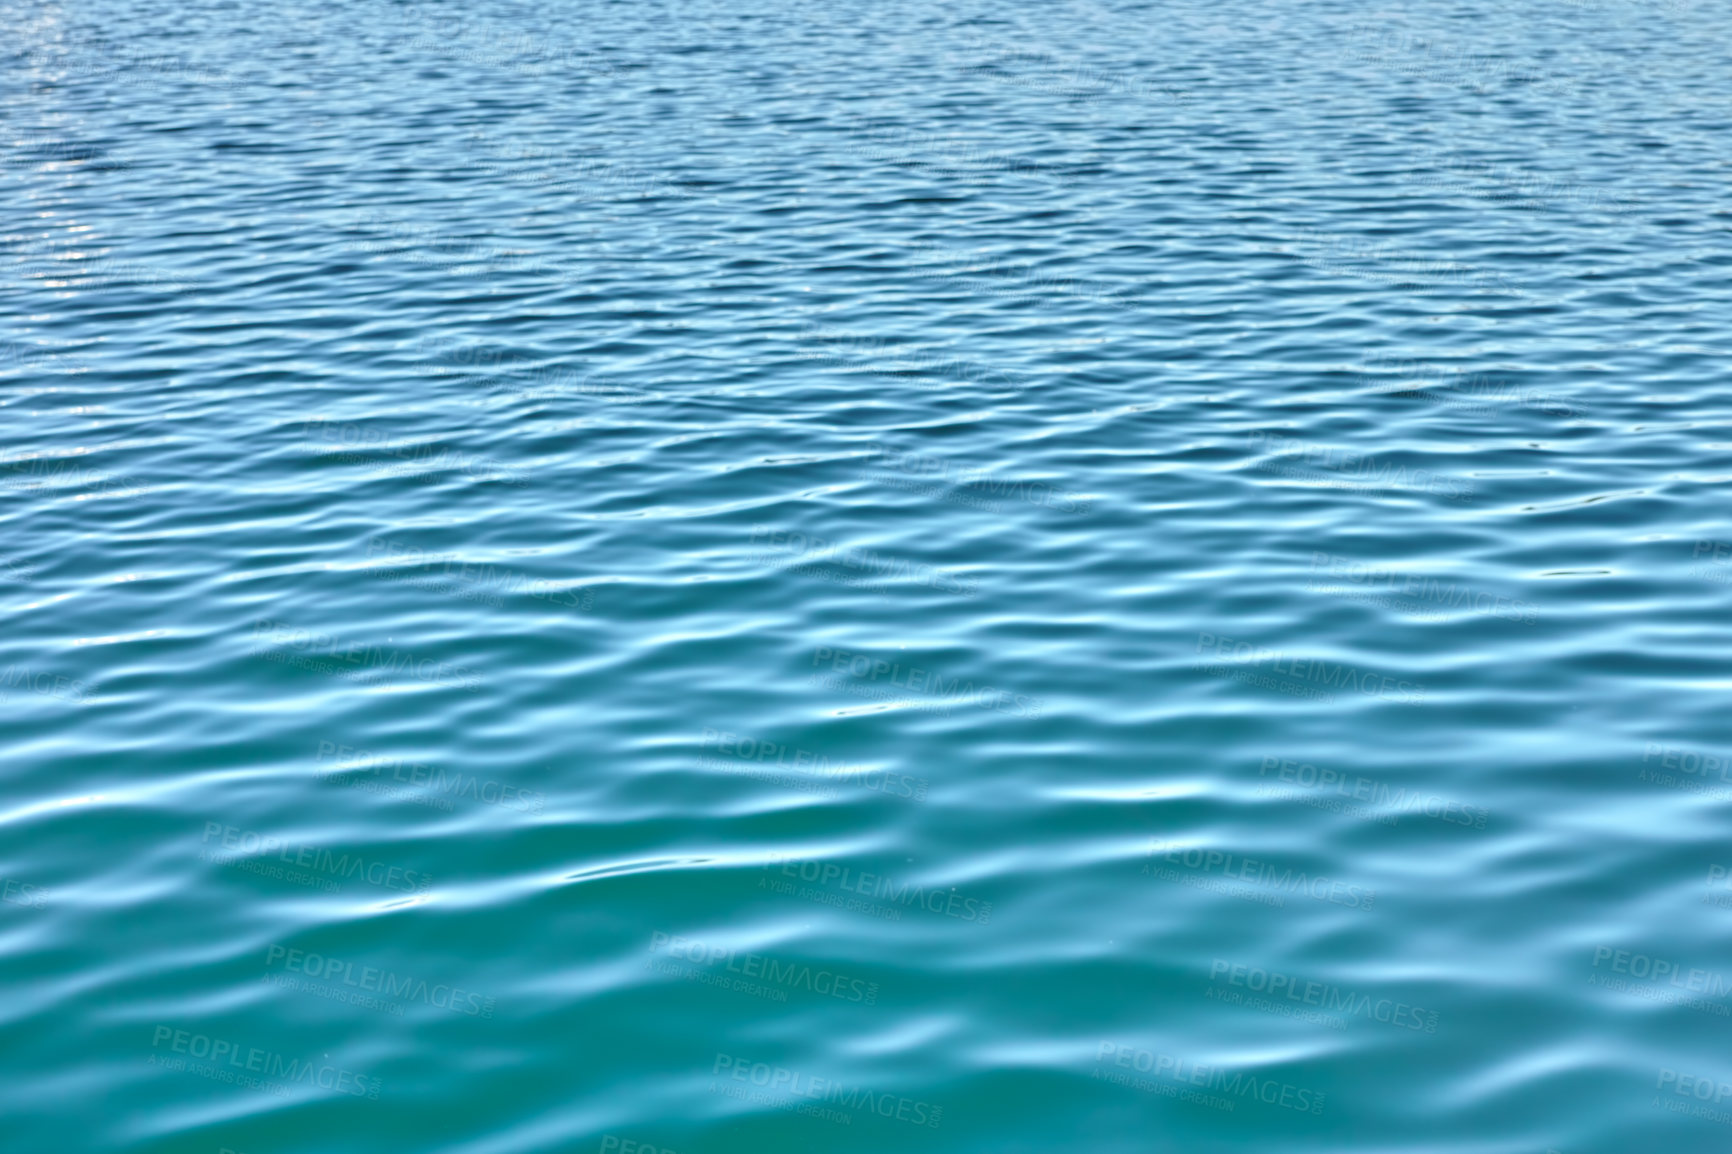 Buy stock photo Water background with ripples and copyspace. Closeup of fresh, calm blue ocean water at low tide. Zoom in on rippled water surface with unique patterns of motion. Zen, tranquil small meditative waves